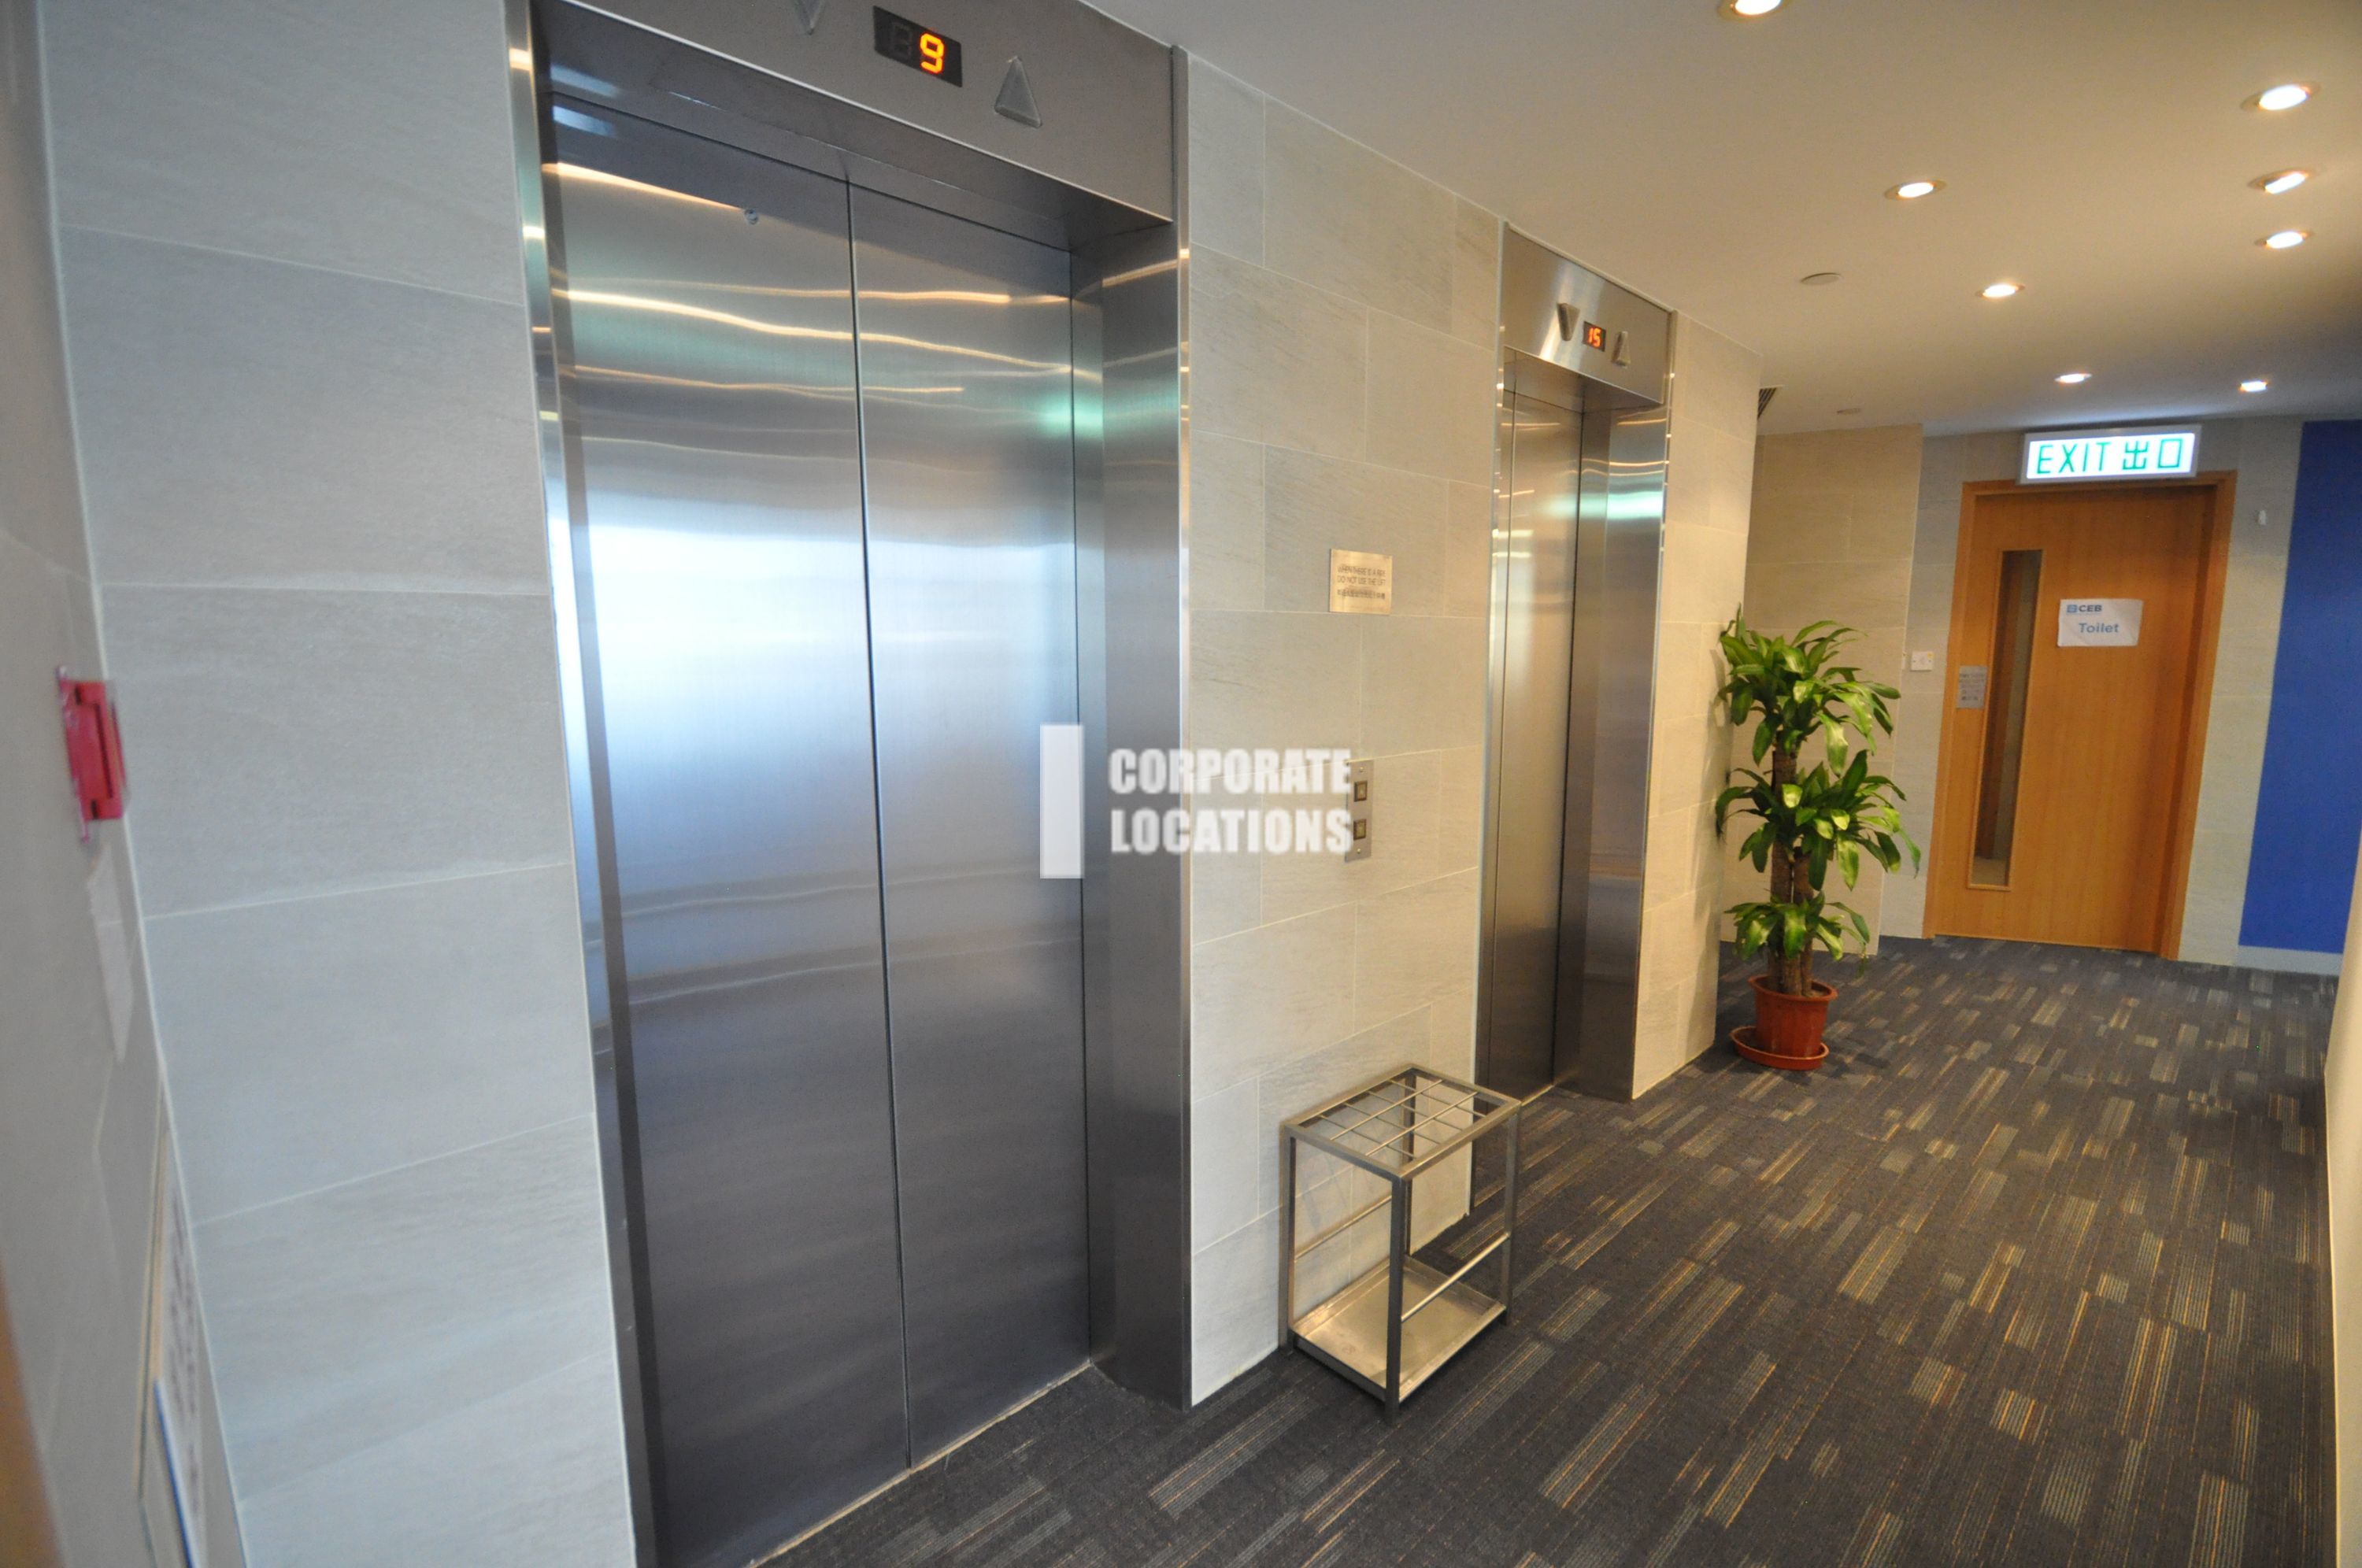 Lease offices in Lee Garden Six - Causeway Bay